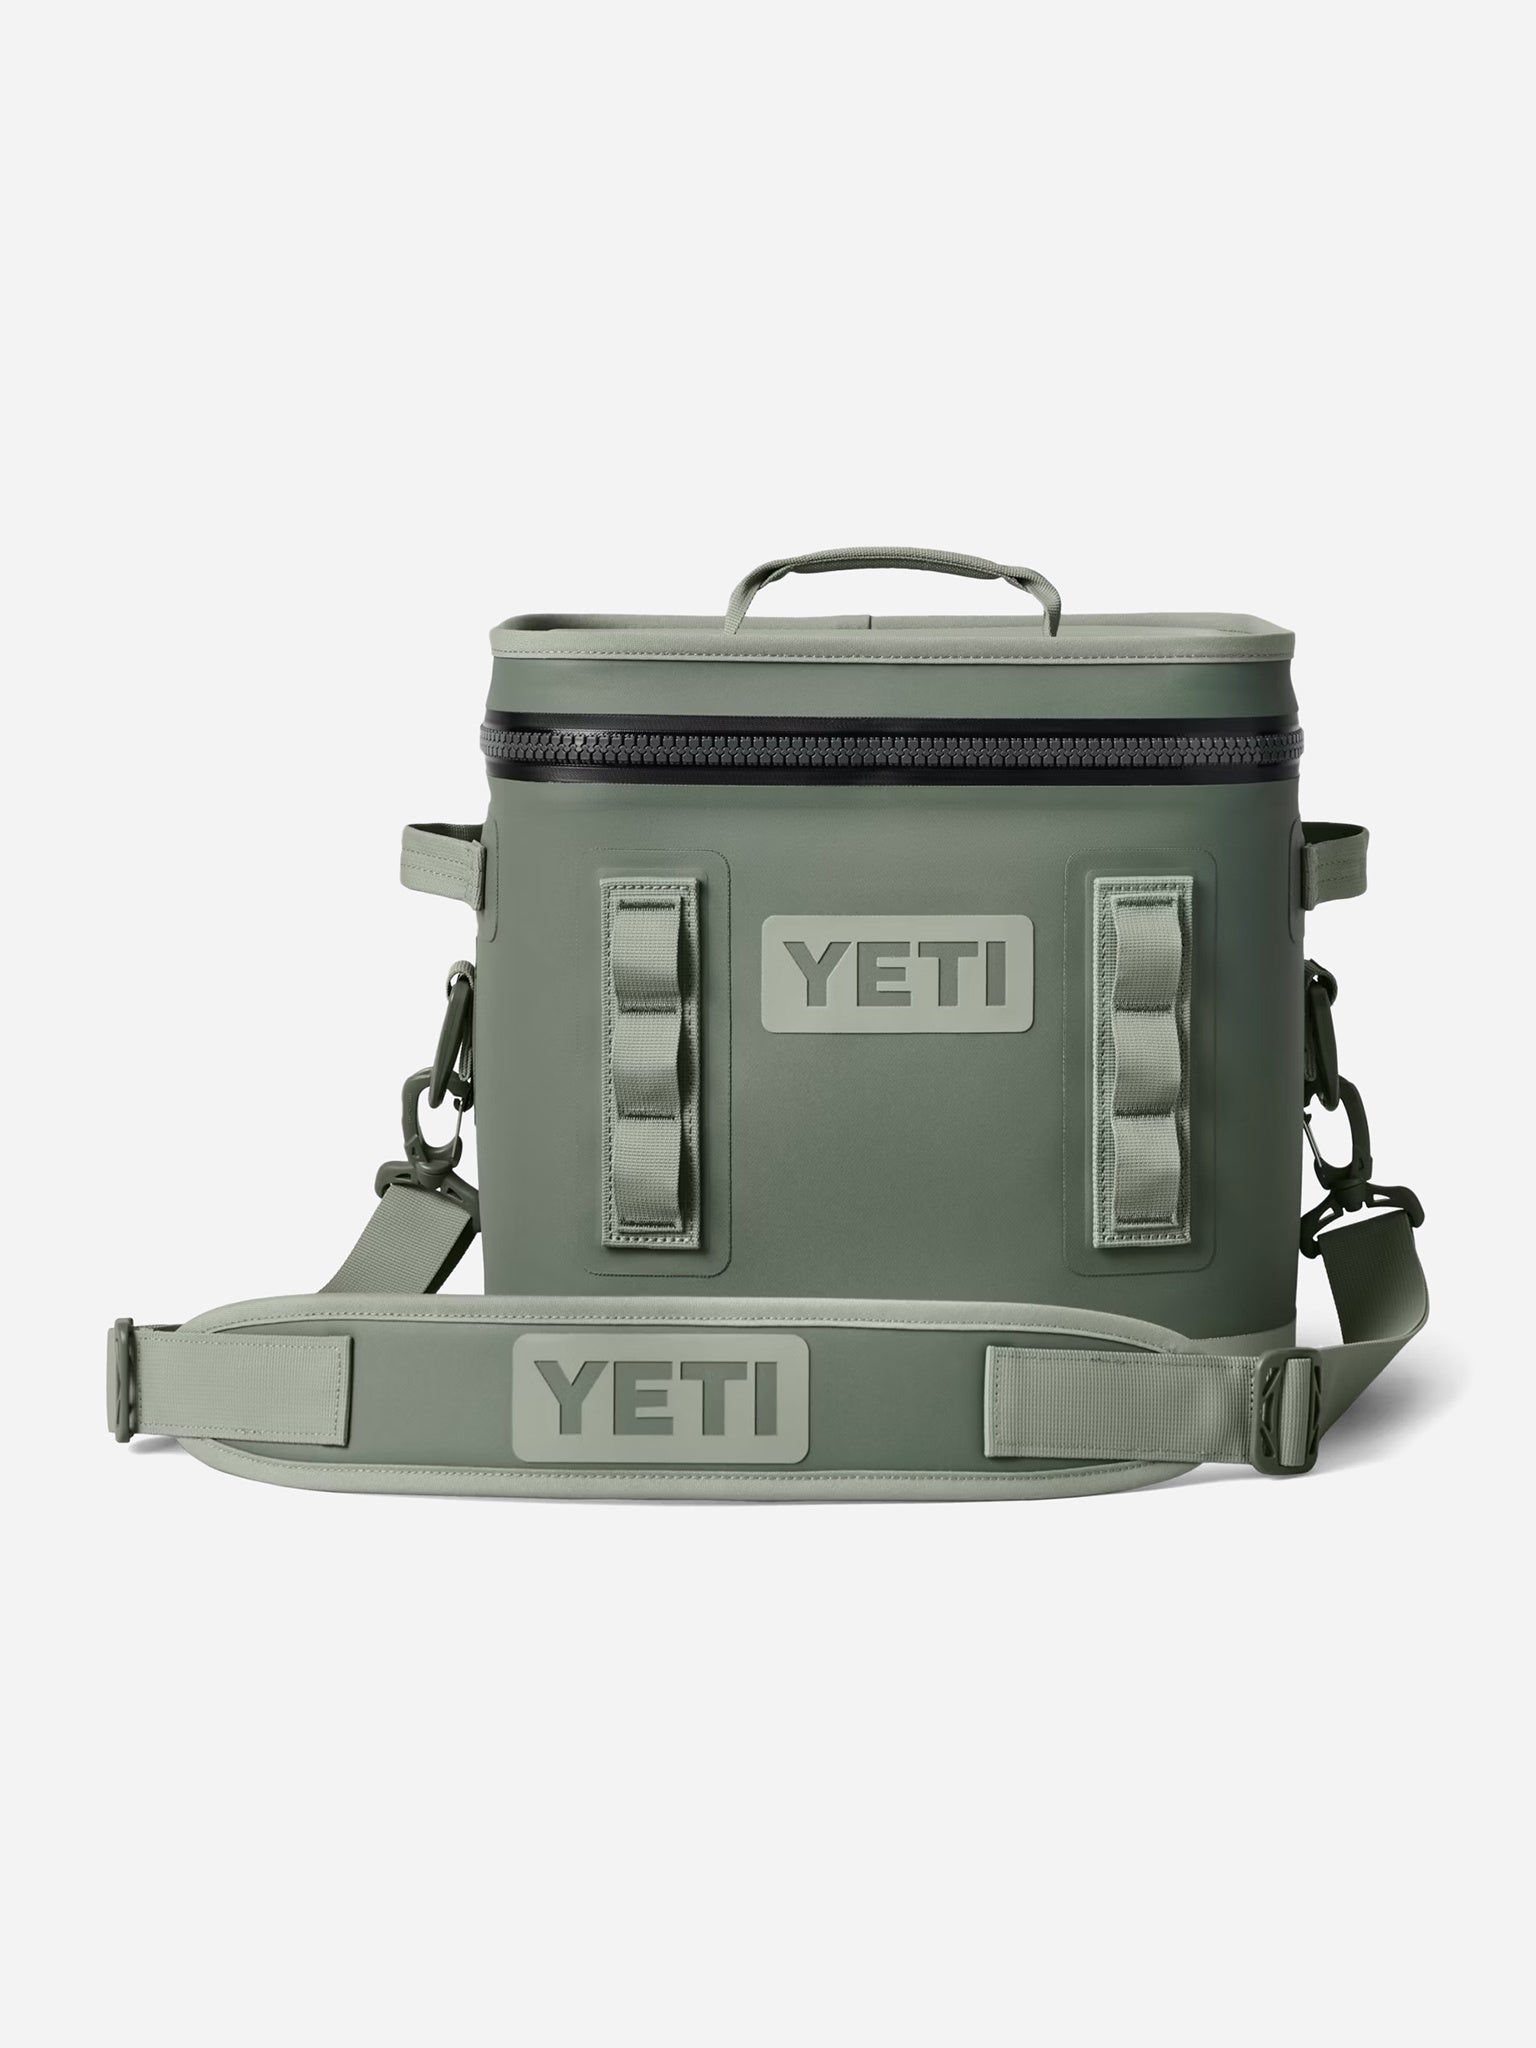 Today's Yeti email : r/YetiCoolers